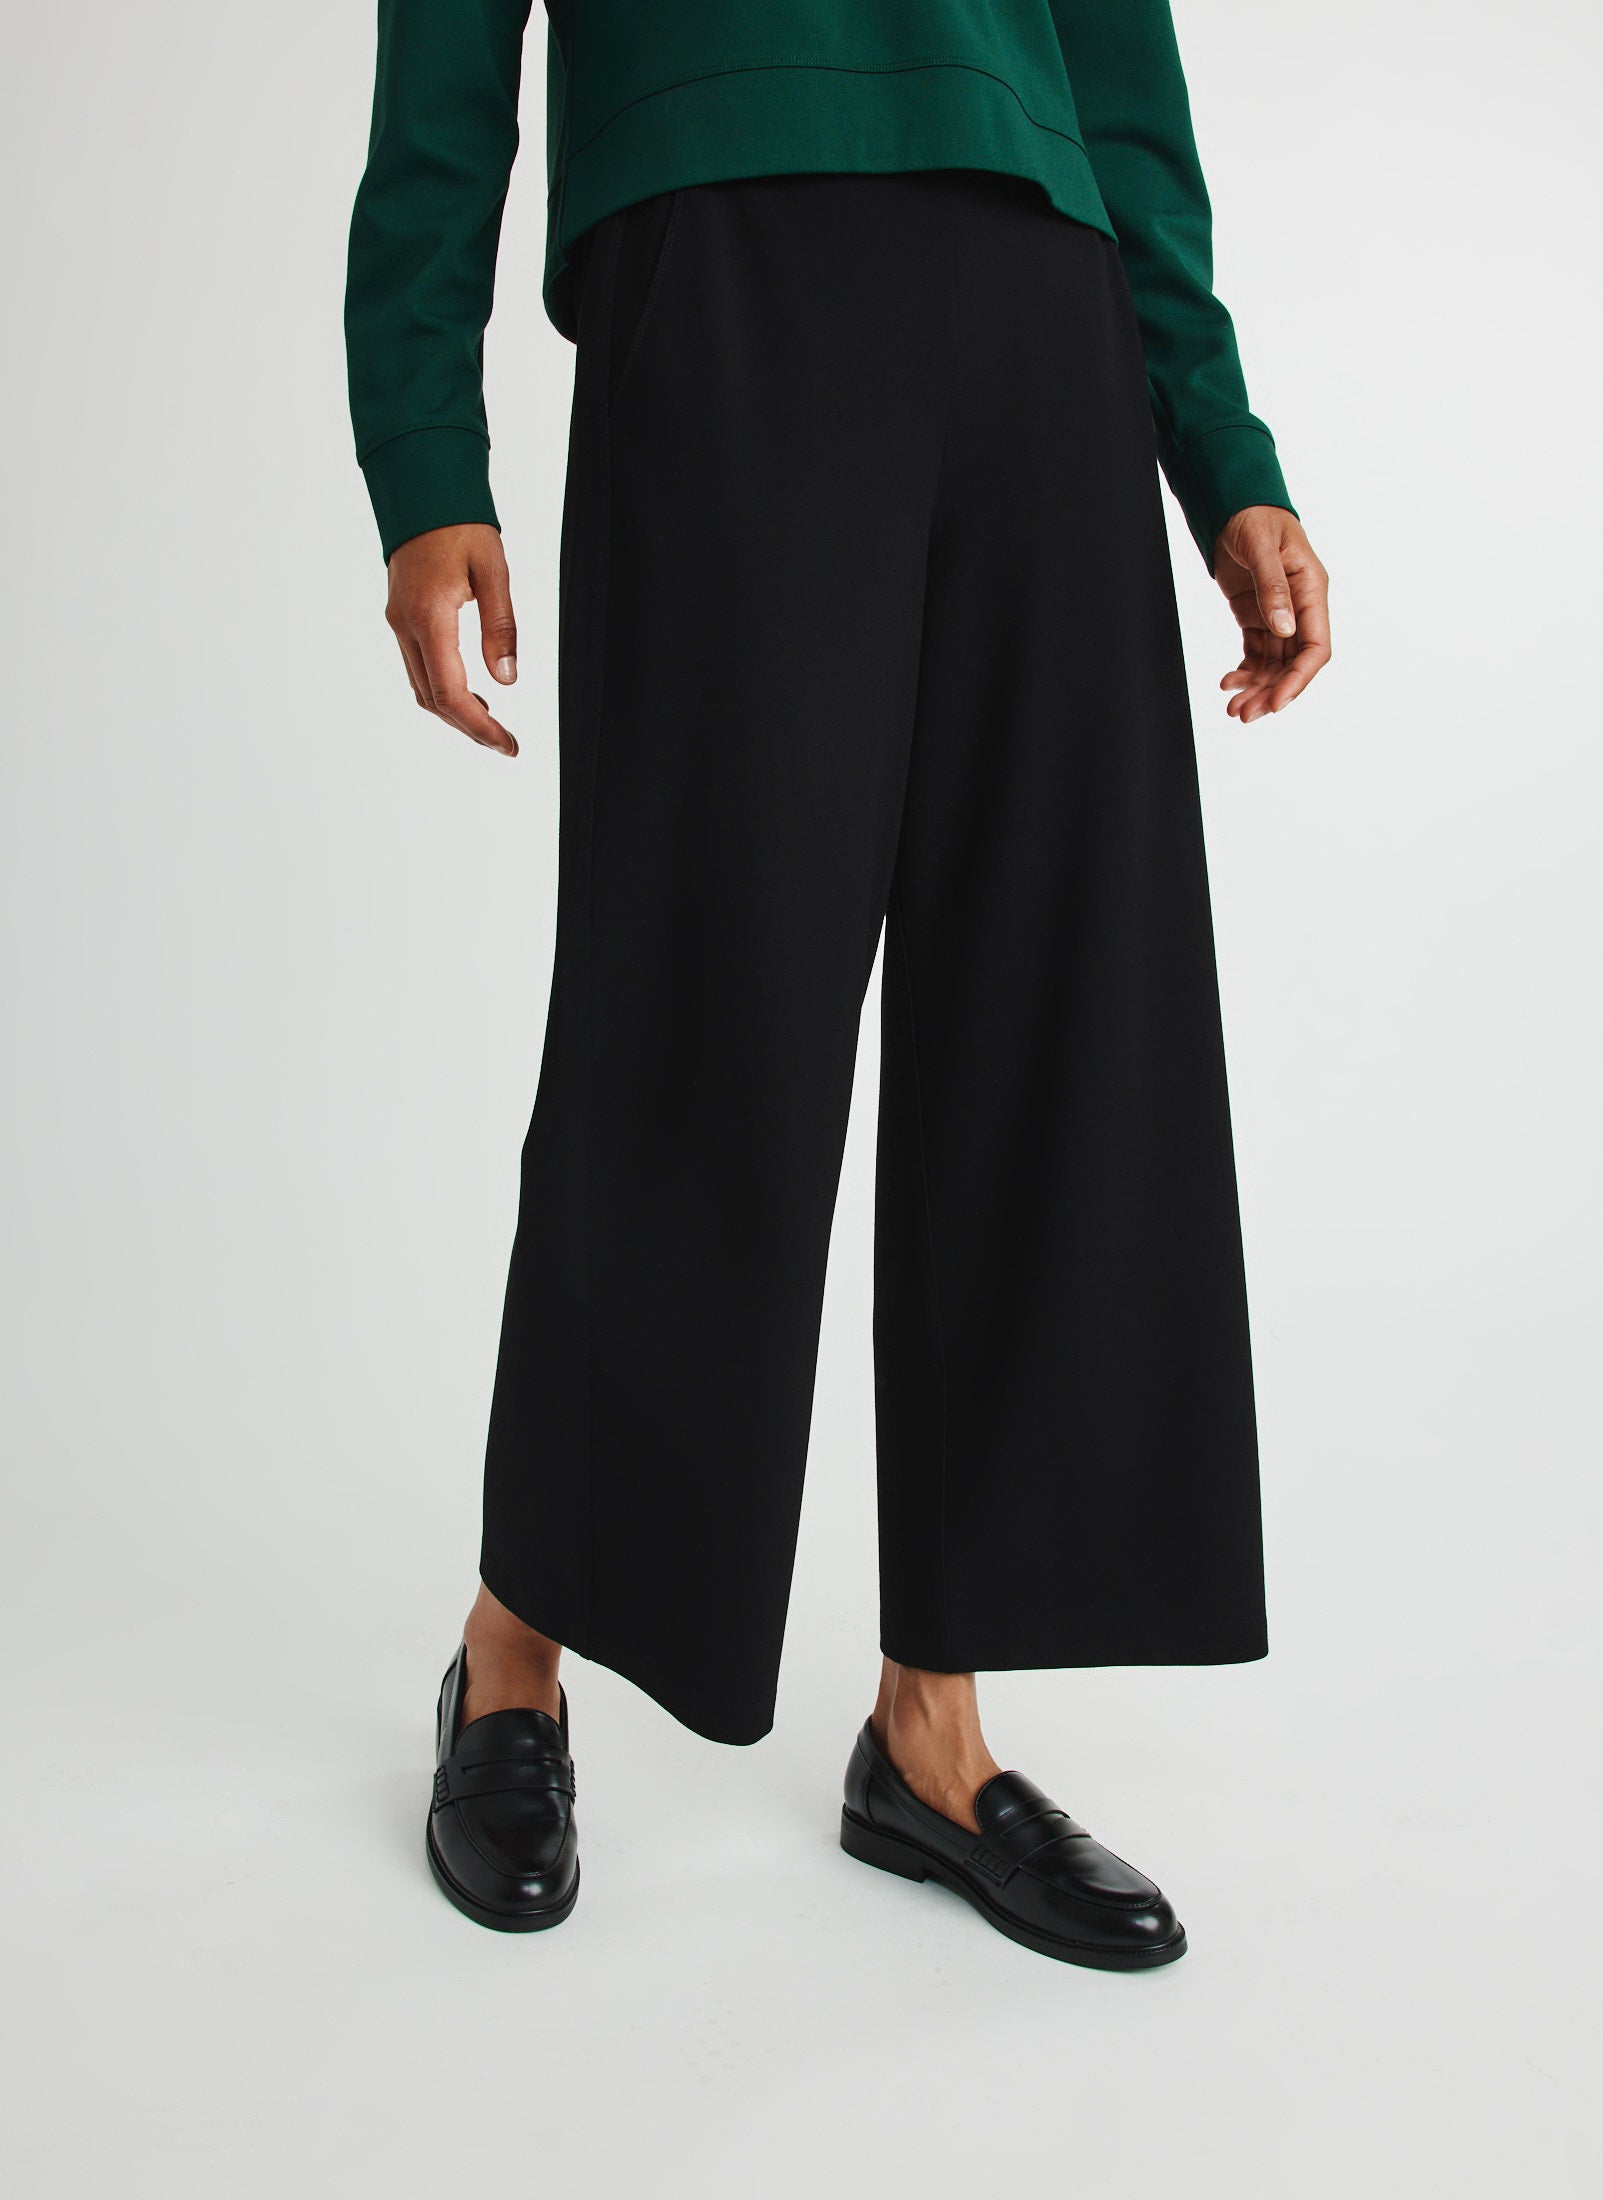 Kit and Ace — Serenity Double Knit Wide Leg Pants